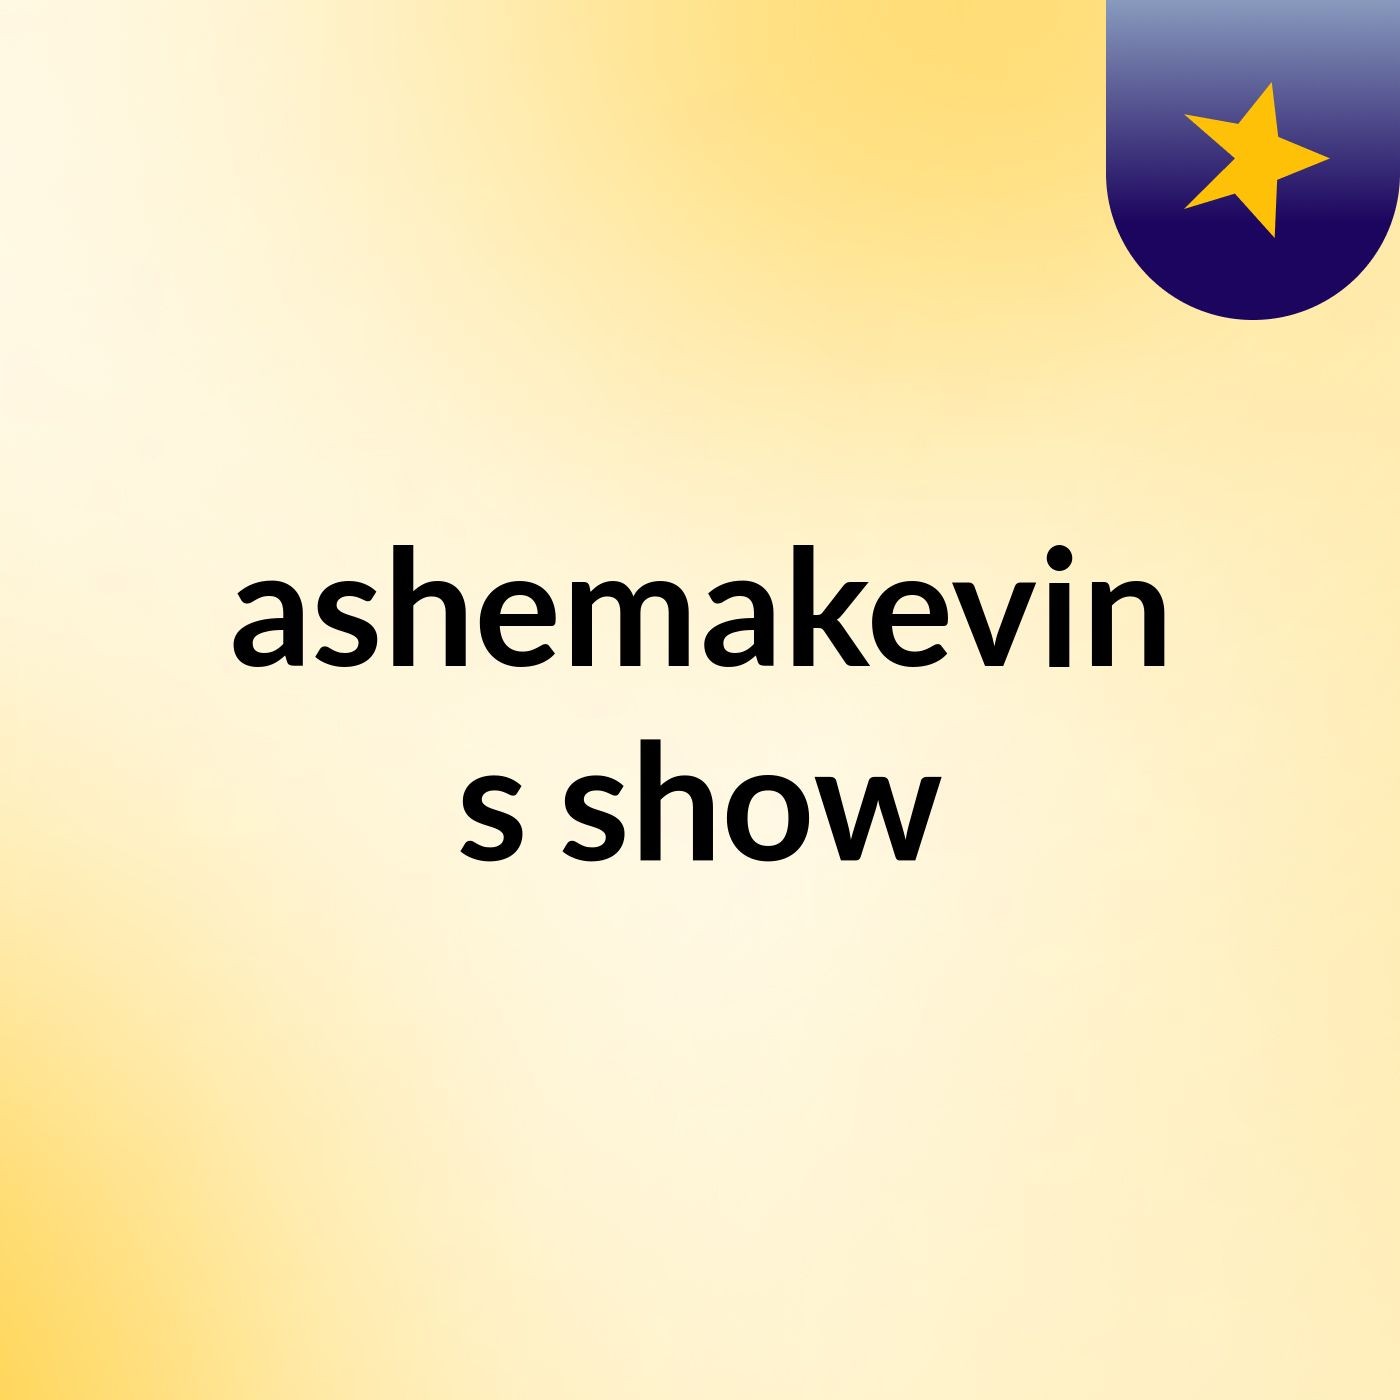 Episode 4 - ashemakevin's show